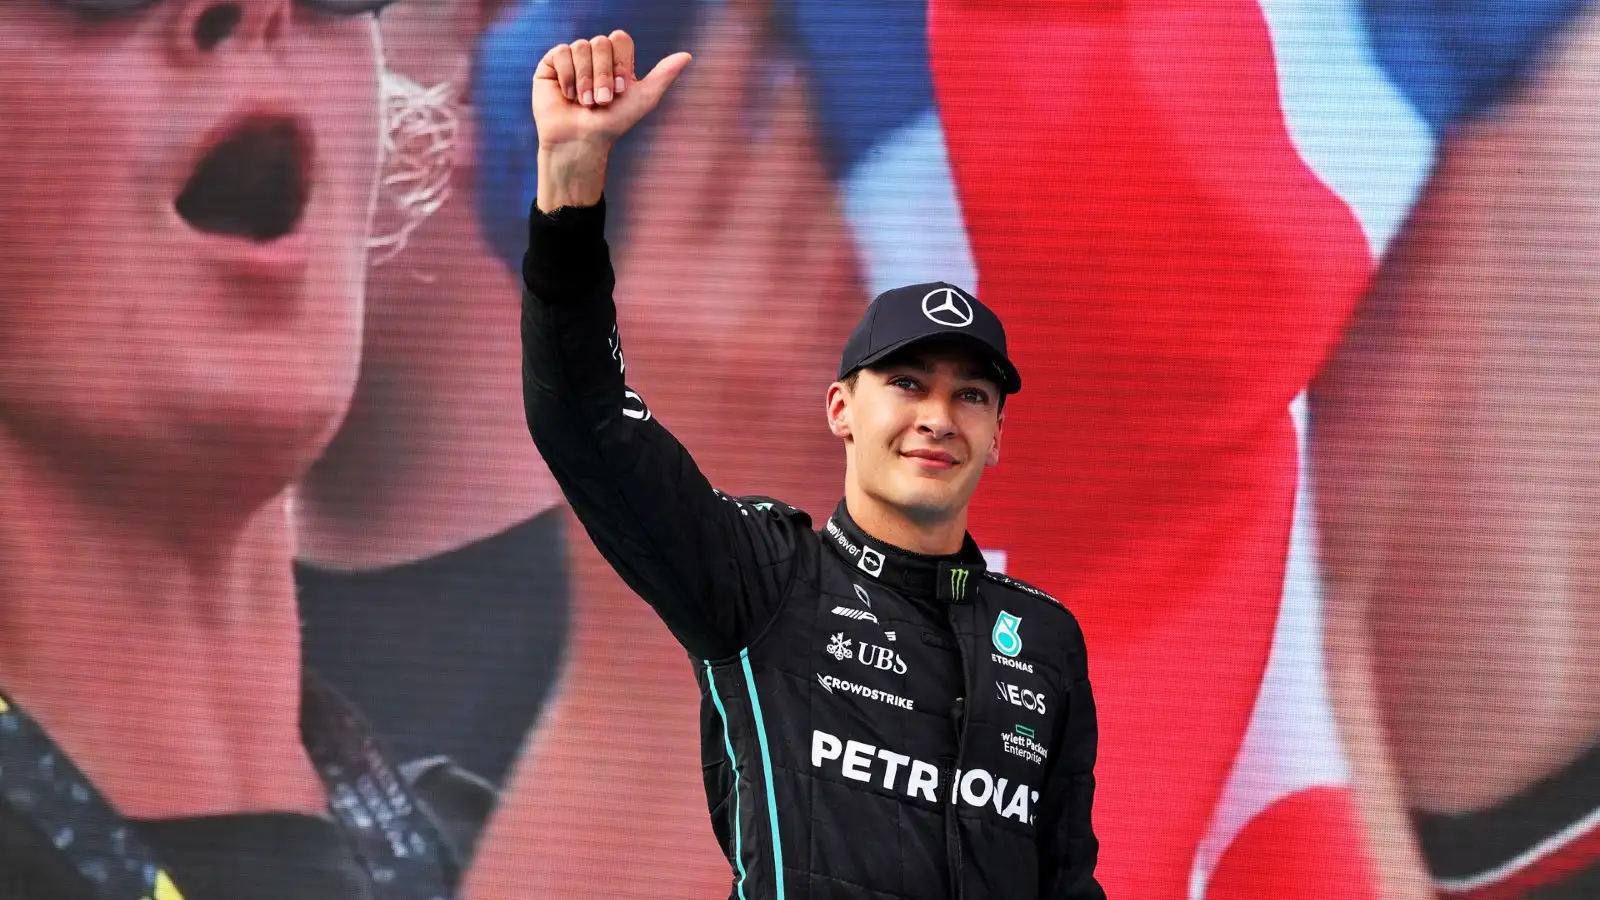 Mercedes' George Russell celebrates pole position at the Hungarian Grand Prix. Budapest, July 2022.